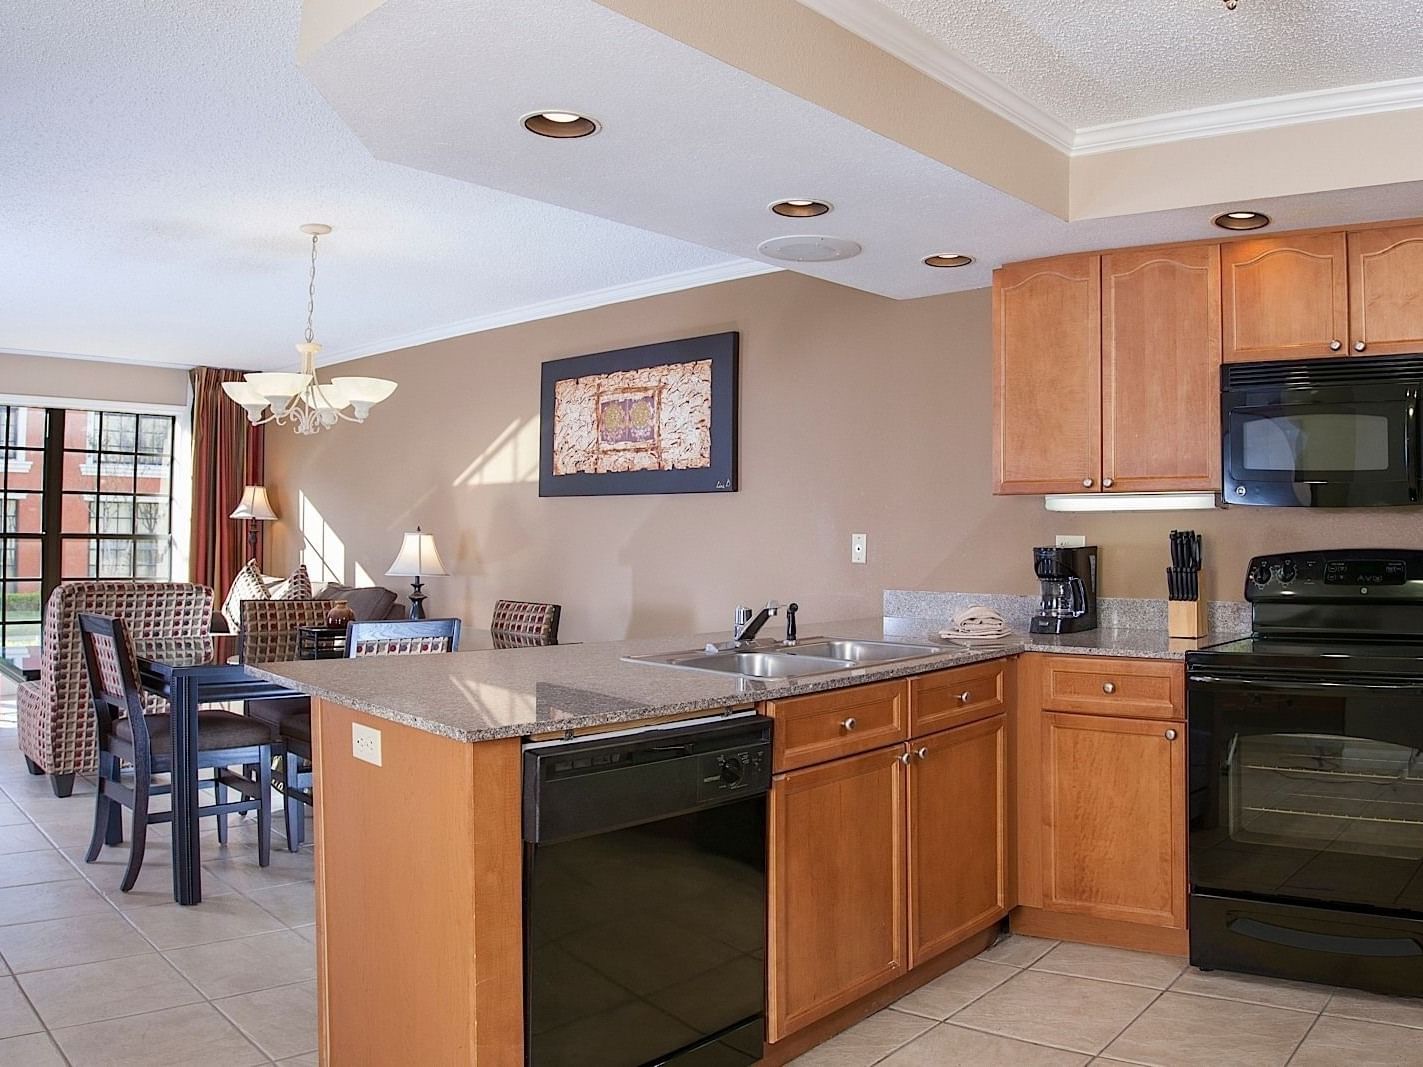 Kitchen, two bedroom deluxe suite at Legacy Vacation Resorts